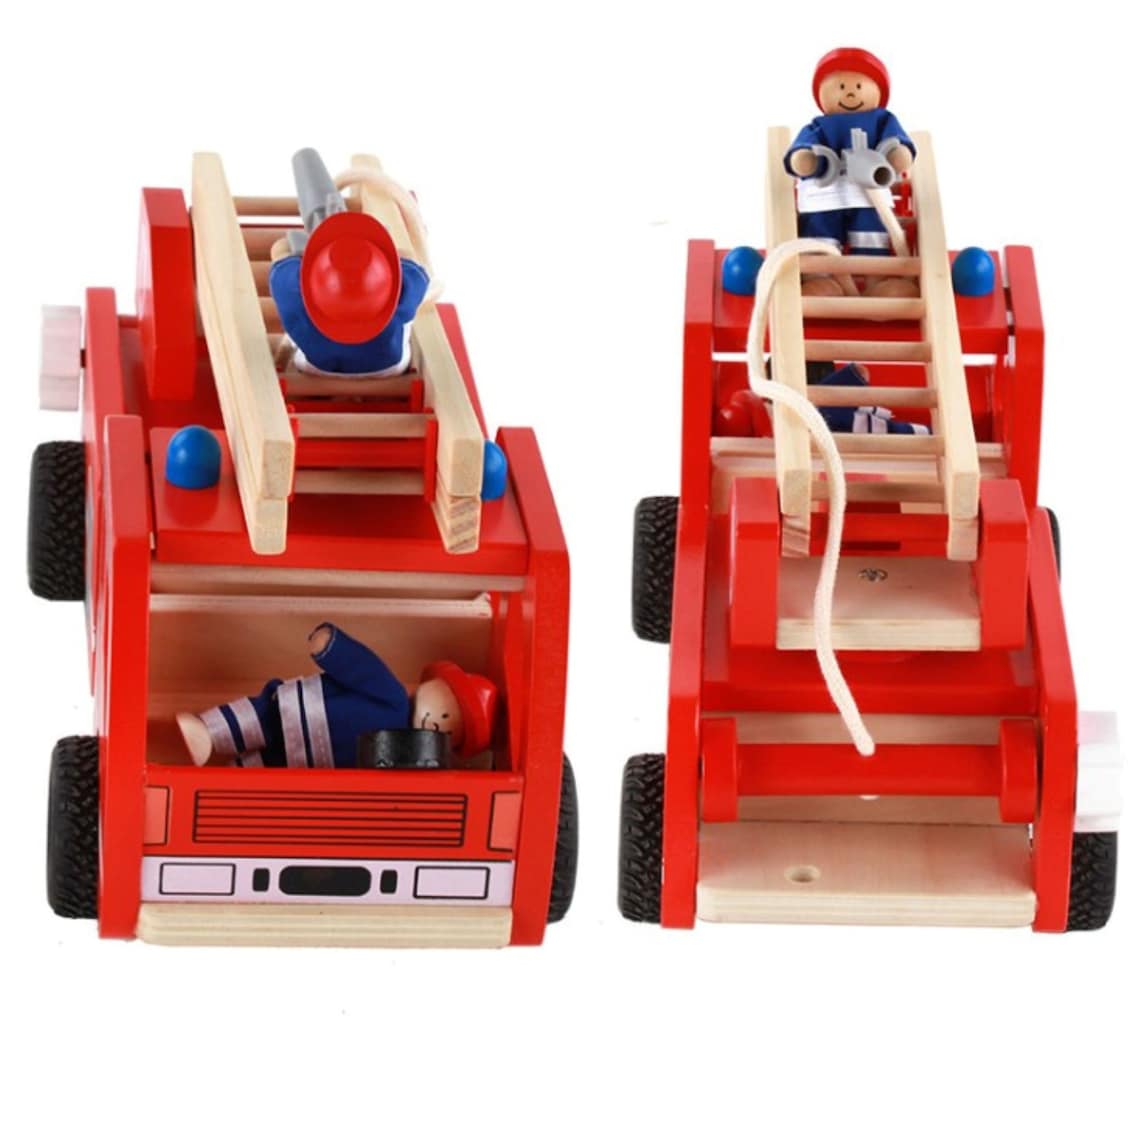 Fire truck wooden 3 years + with ladder and firemen Fire engine Red